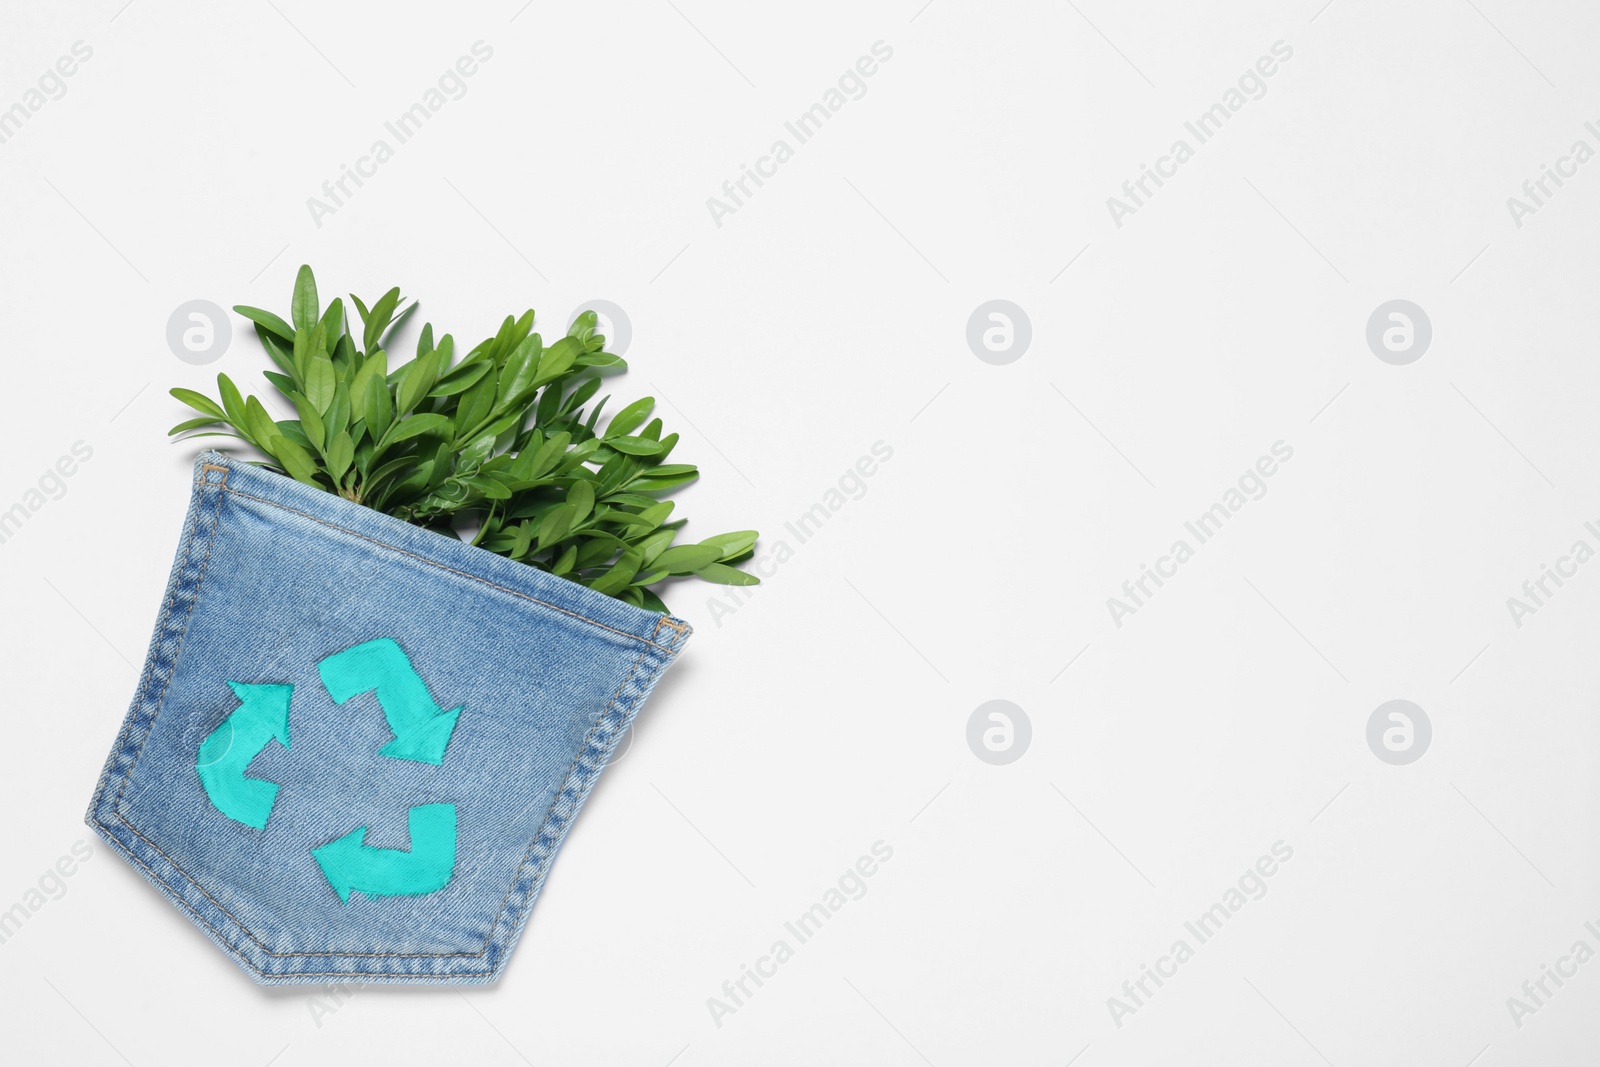 Photo of Twigs of green plant in jeans pocket with recycling symbol on white background, top view. Space for text